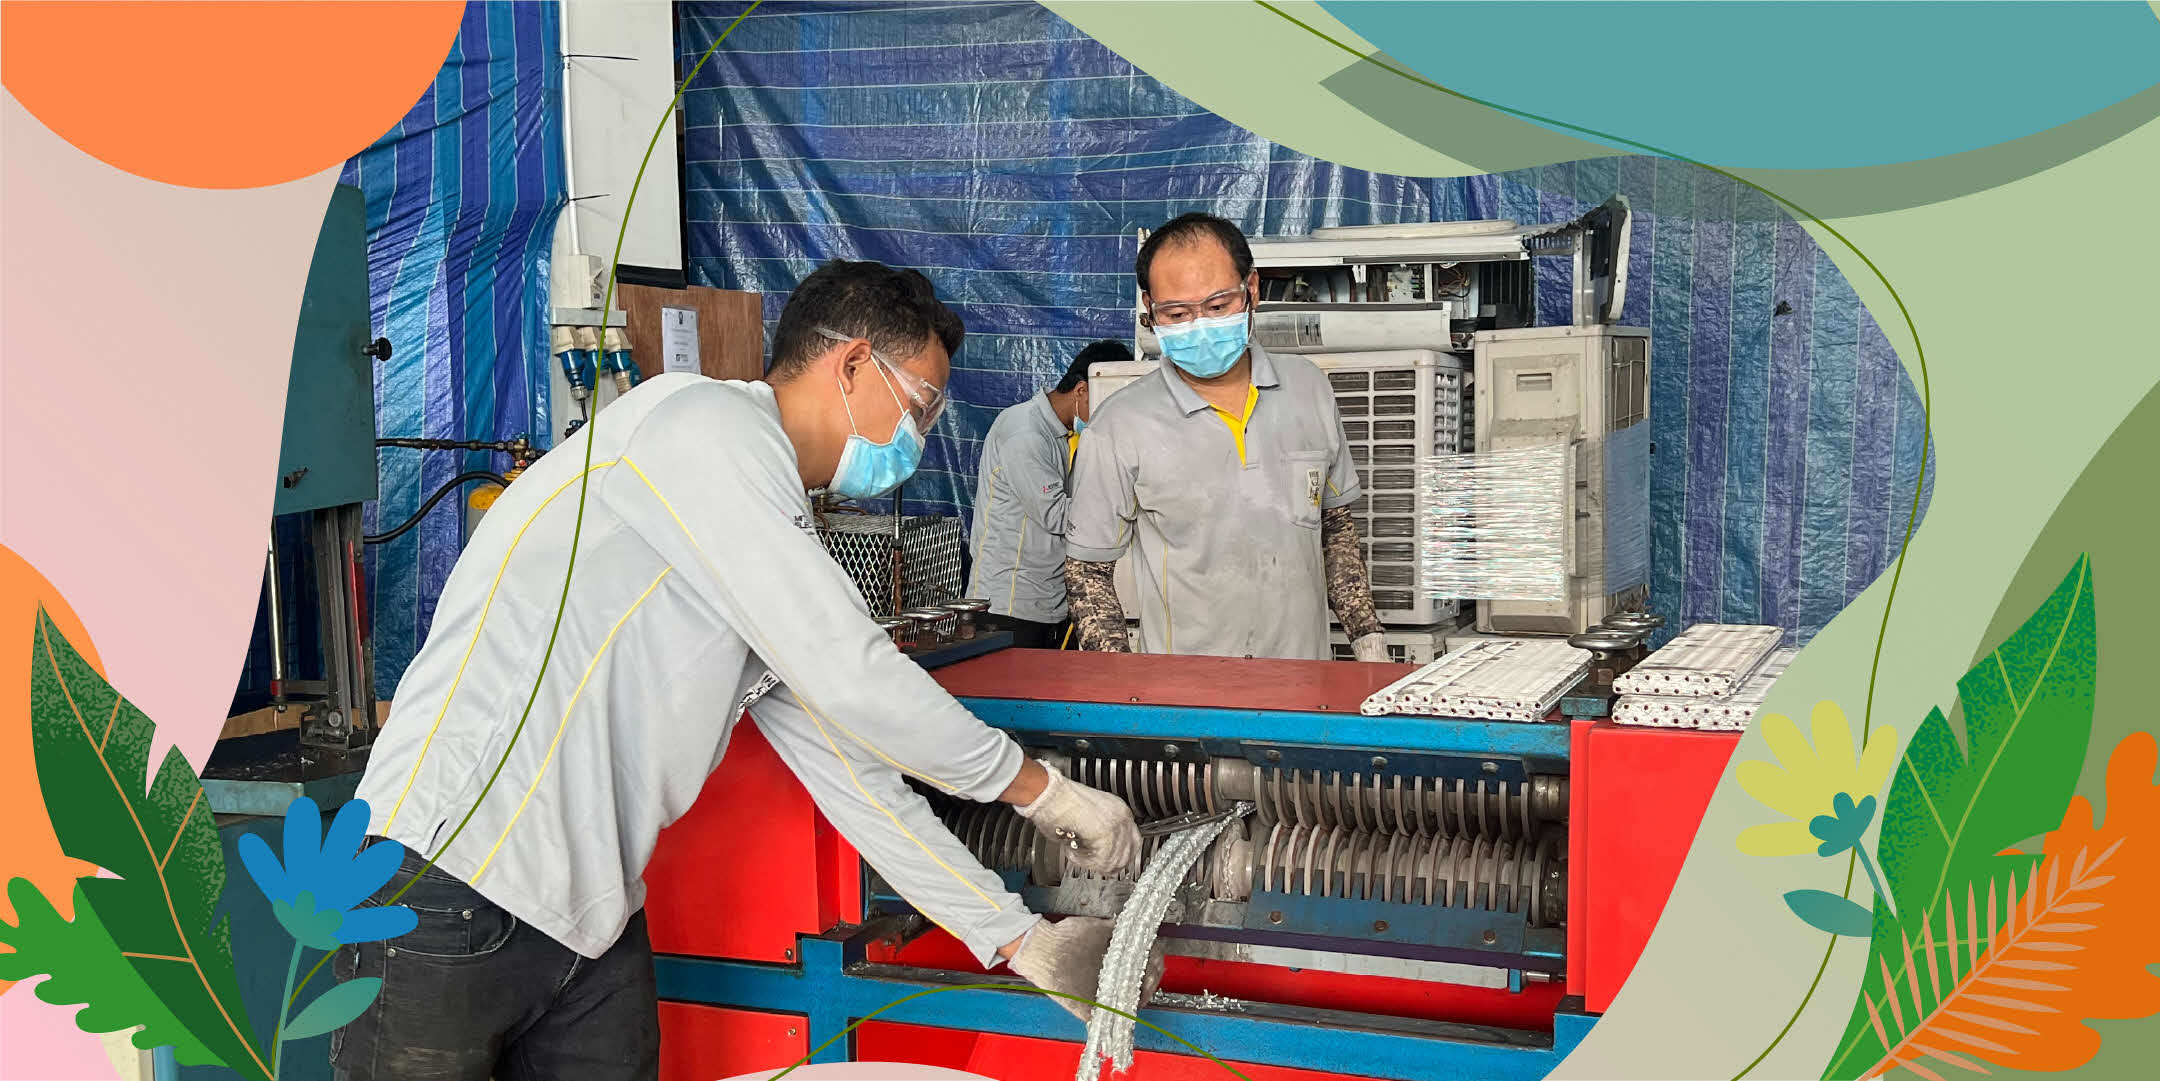 Air-conditioner Recycling and Eco Tour at Gain City